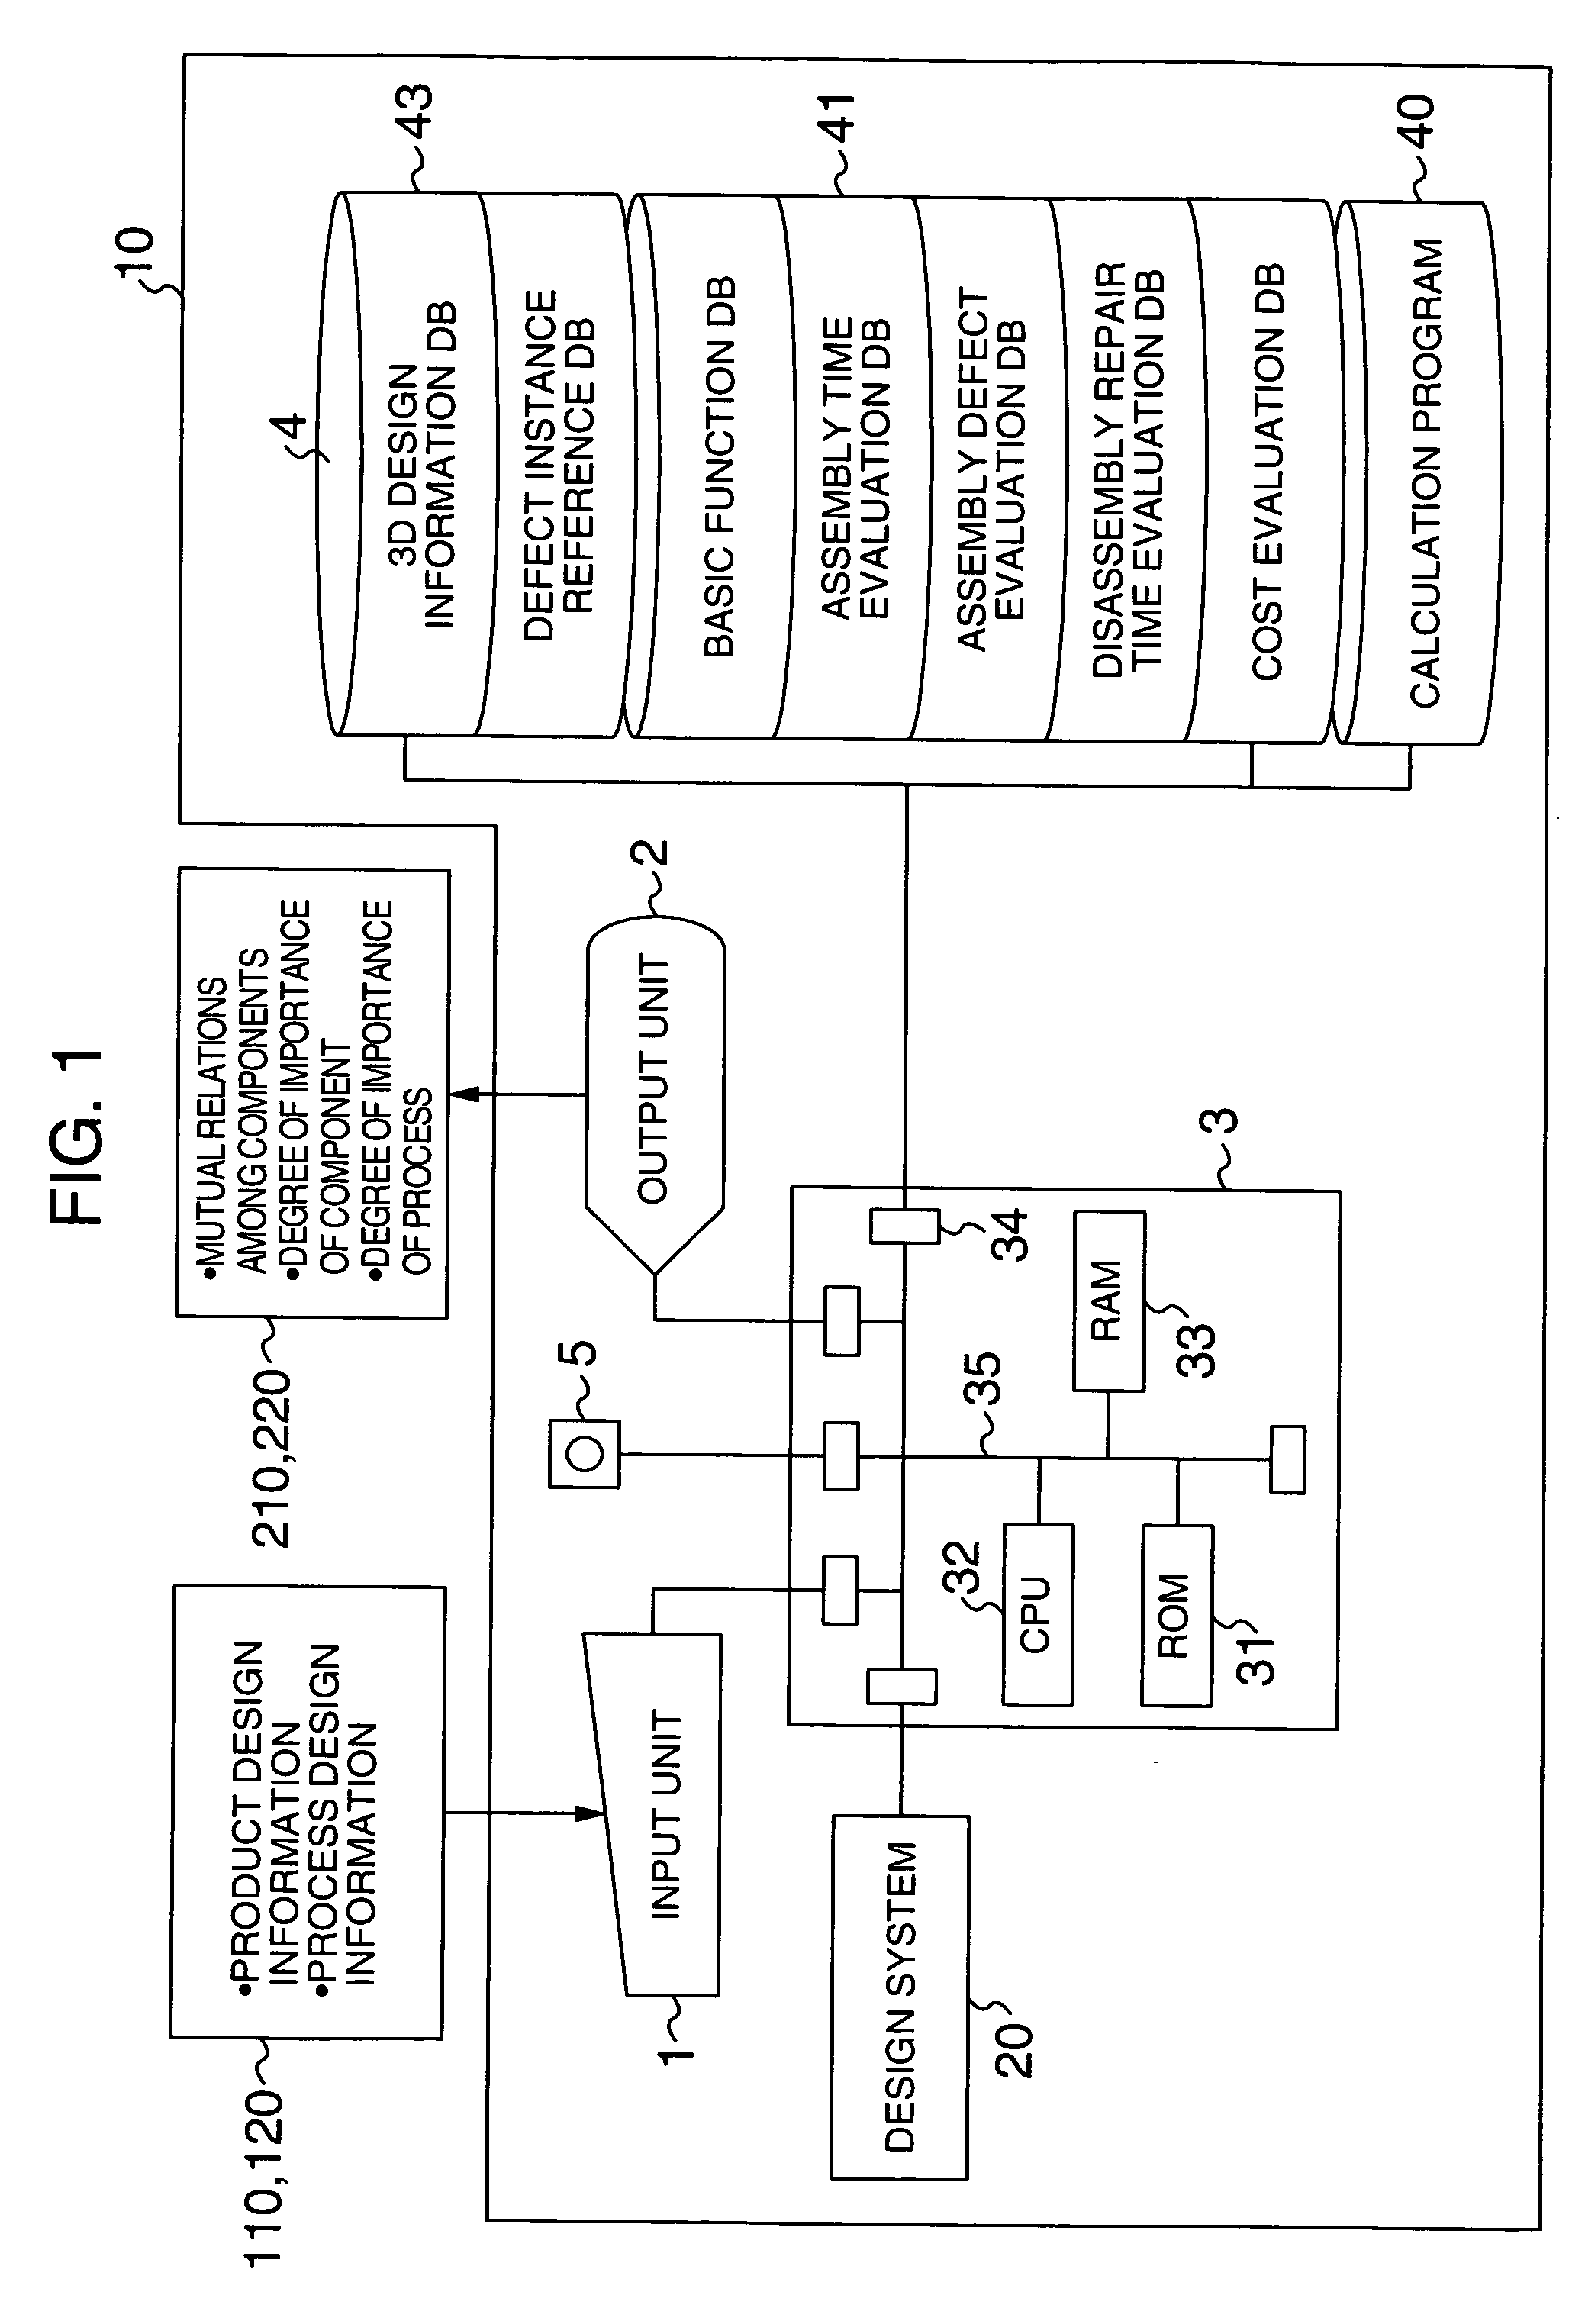 Defect influence degree evaluation method and design support system